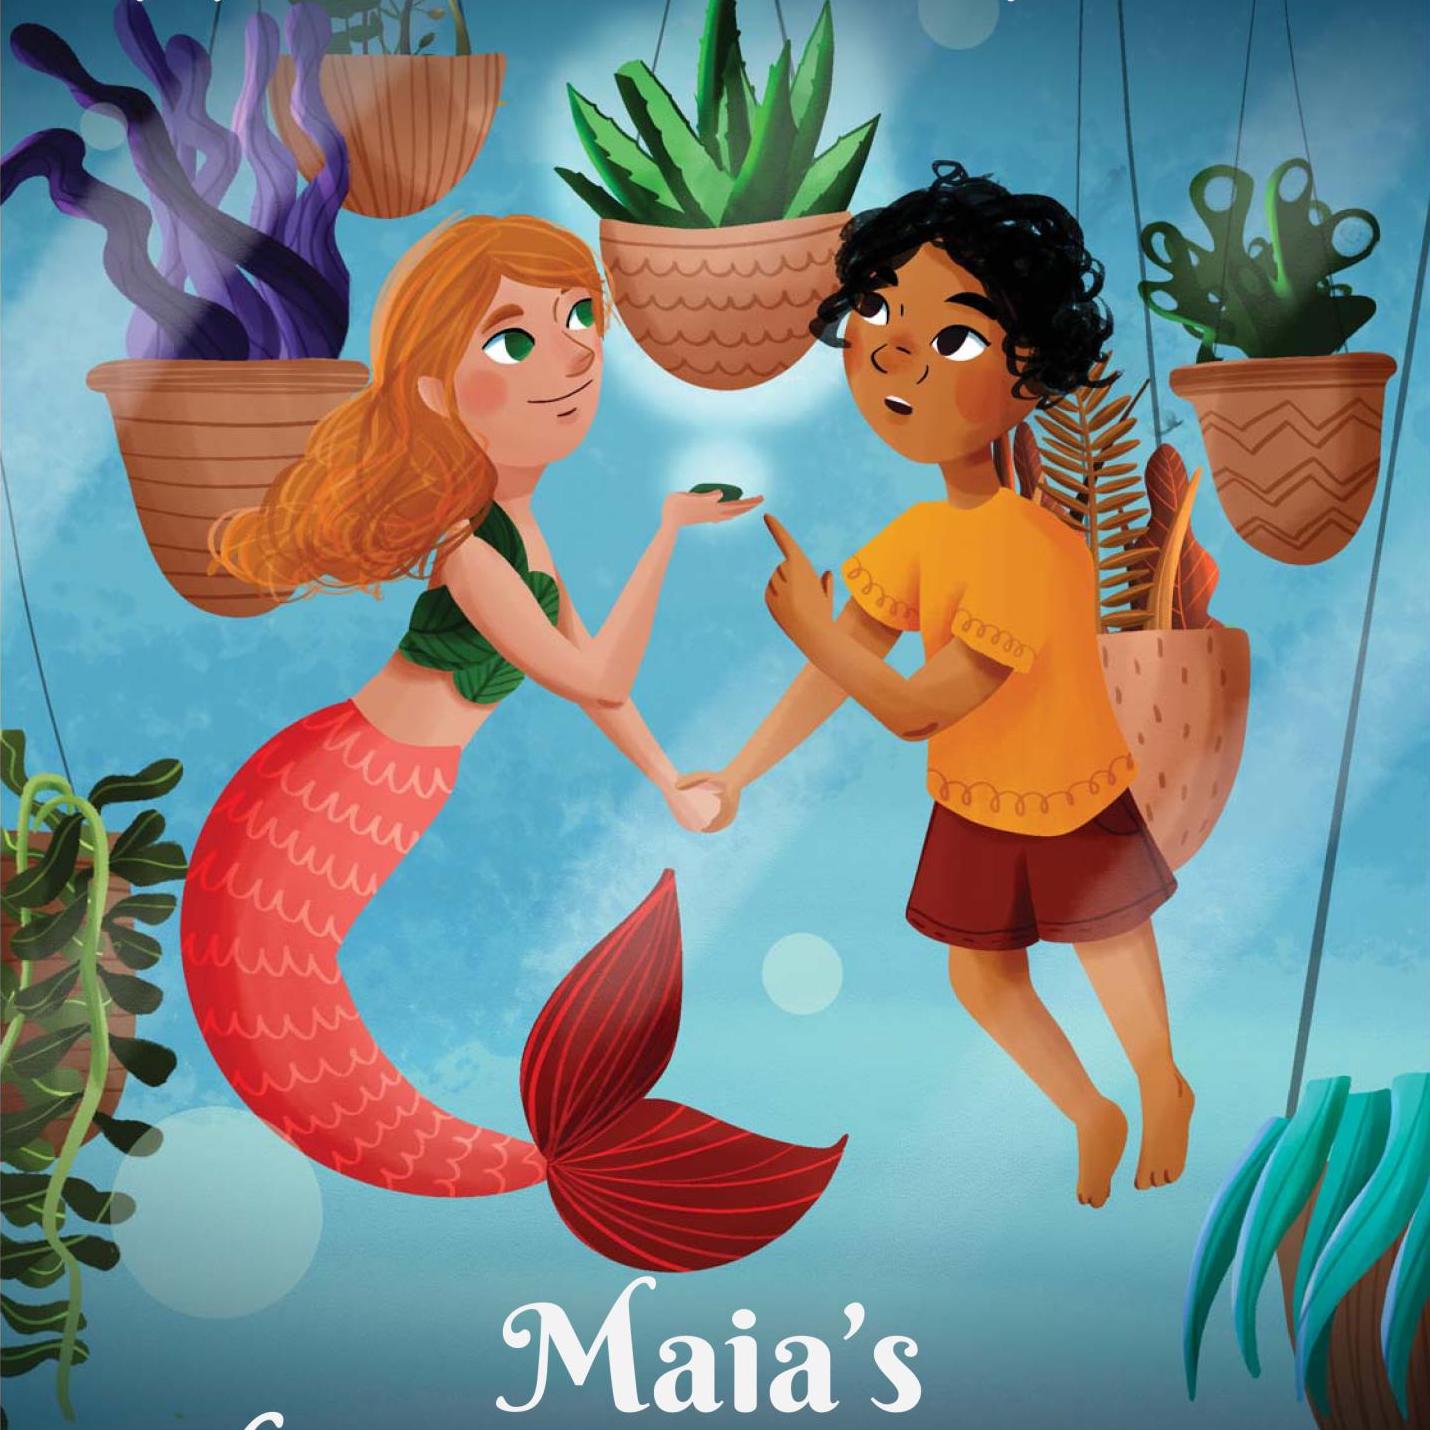 I'm Sticking With YouTrezzie from Maia's Mermaid Friend Cover66